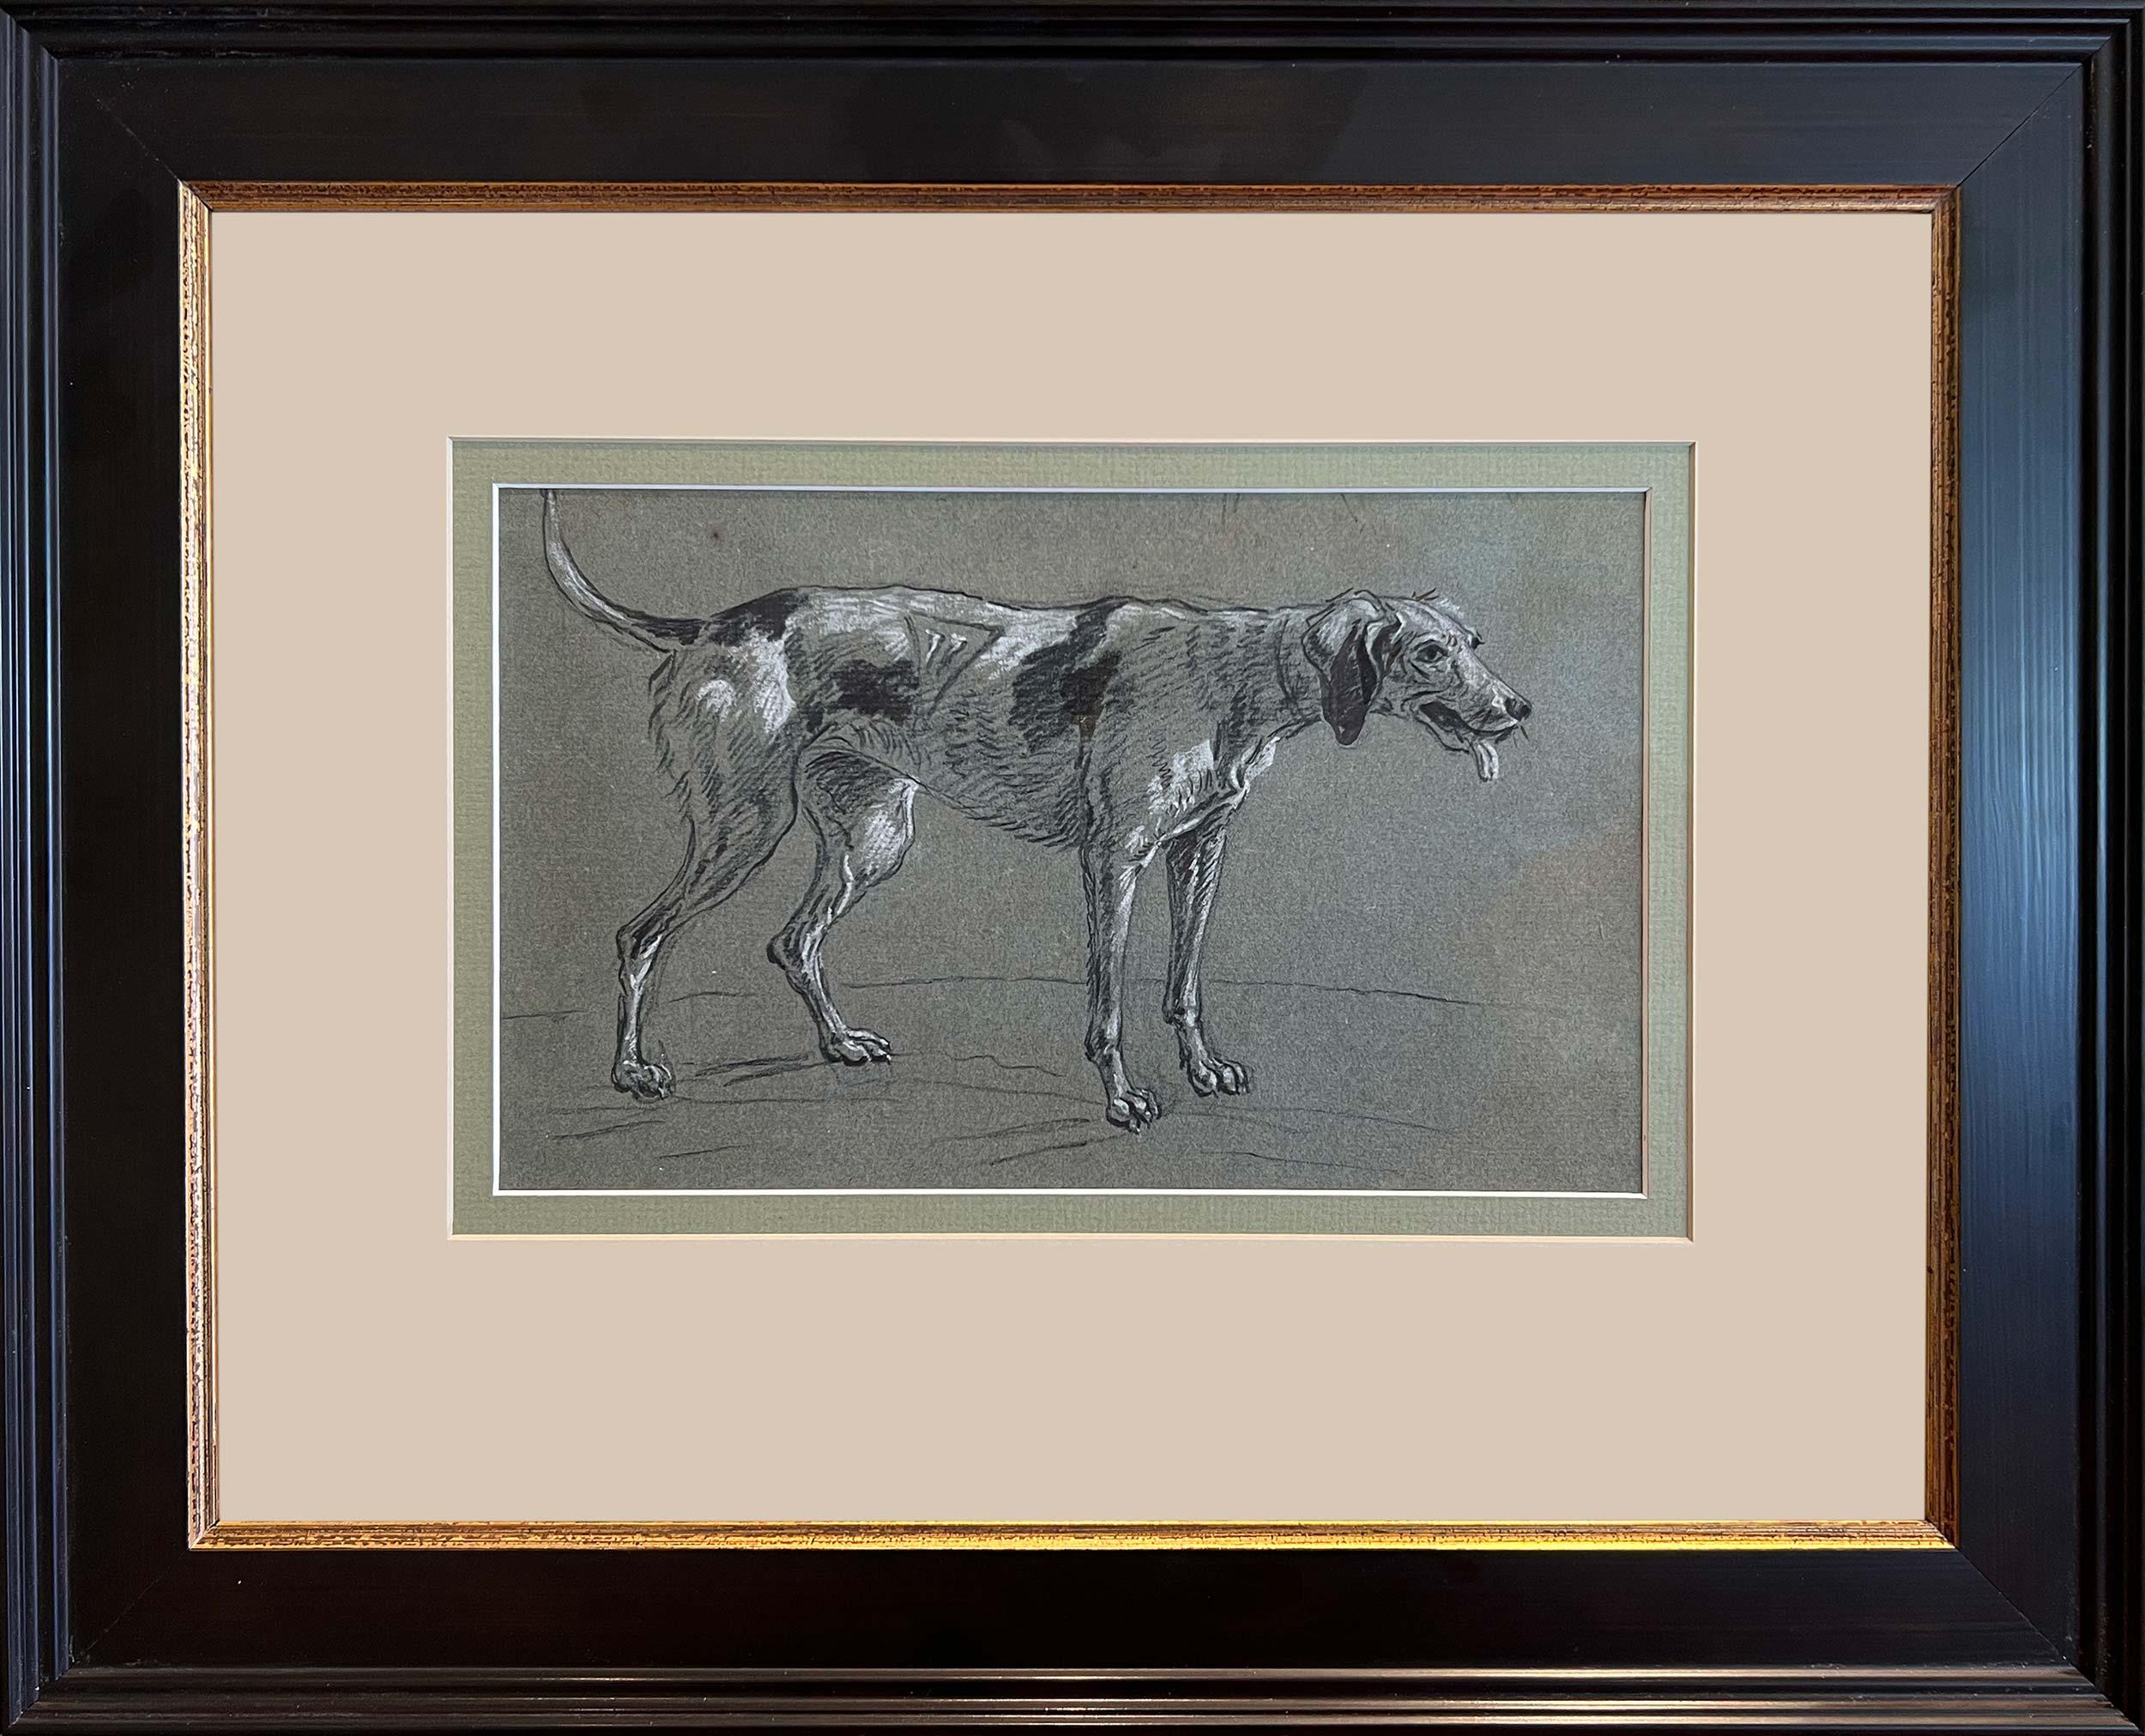 Louis Auguste Brun (Swiss 1758-1815), Study of a Hound Dog. Circa 1782.
A skilled draughtsman and an outstanding painter of portraits, animals and landscapes, the Swiss artist Louis-Auguste Brun (1758–1815) is today principally known for the works